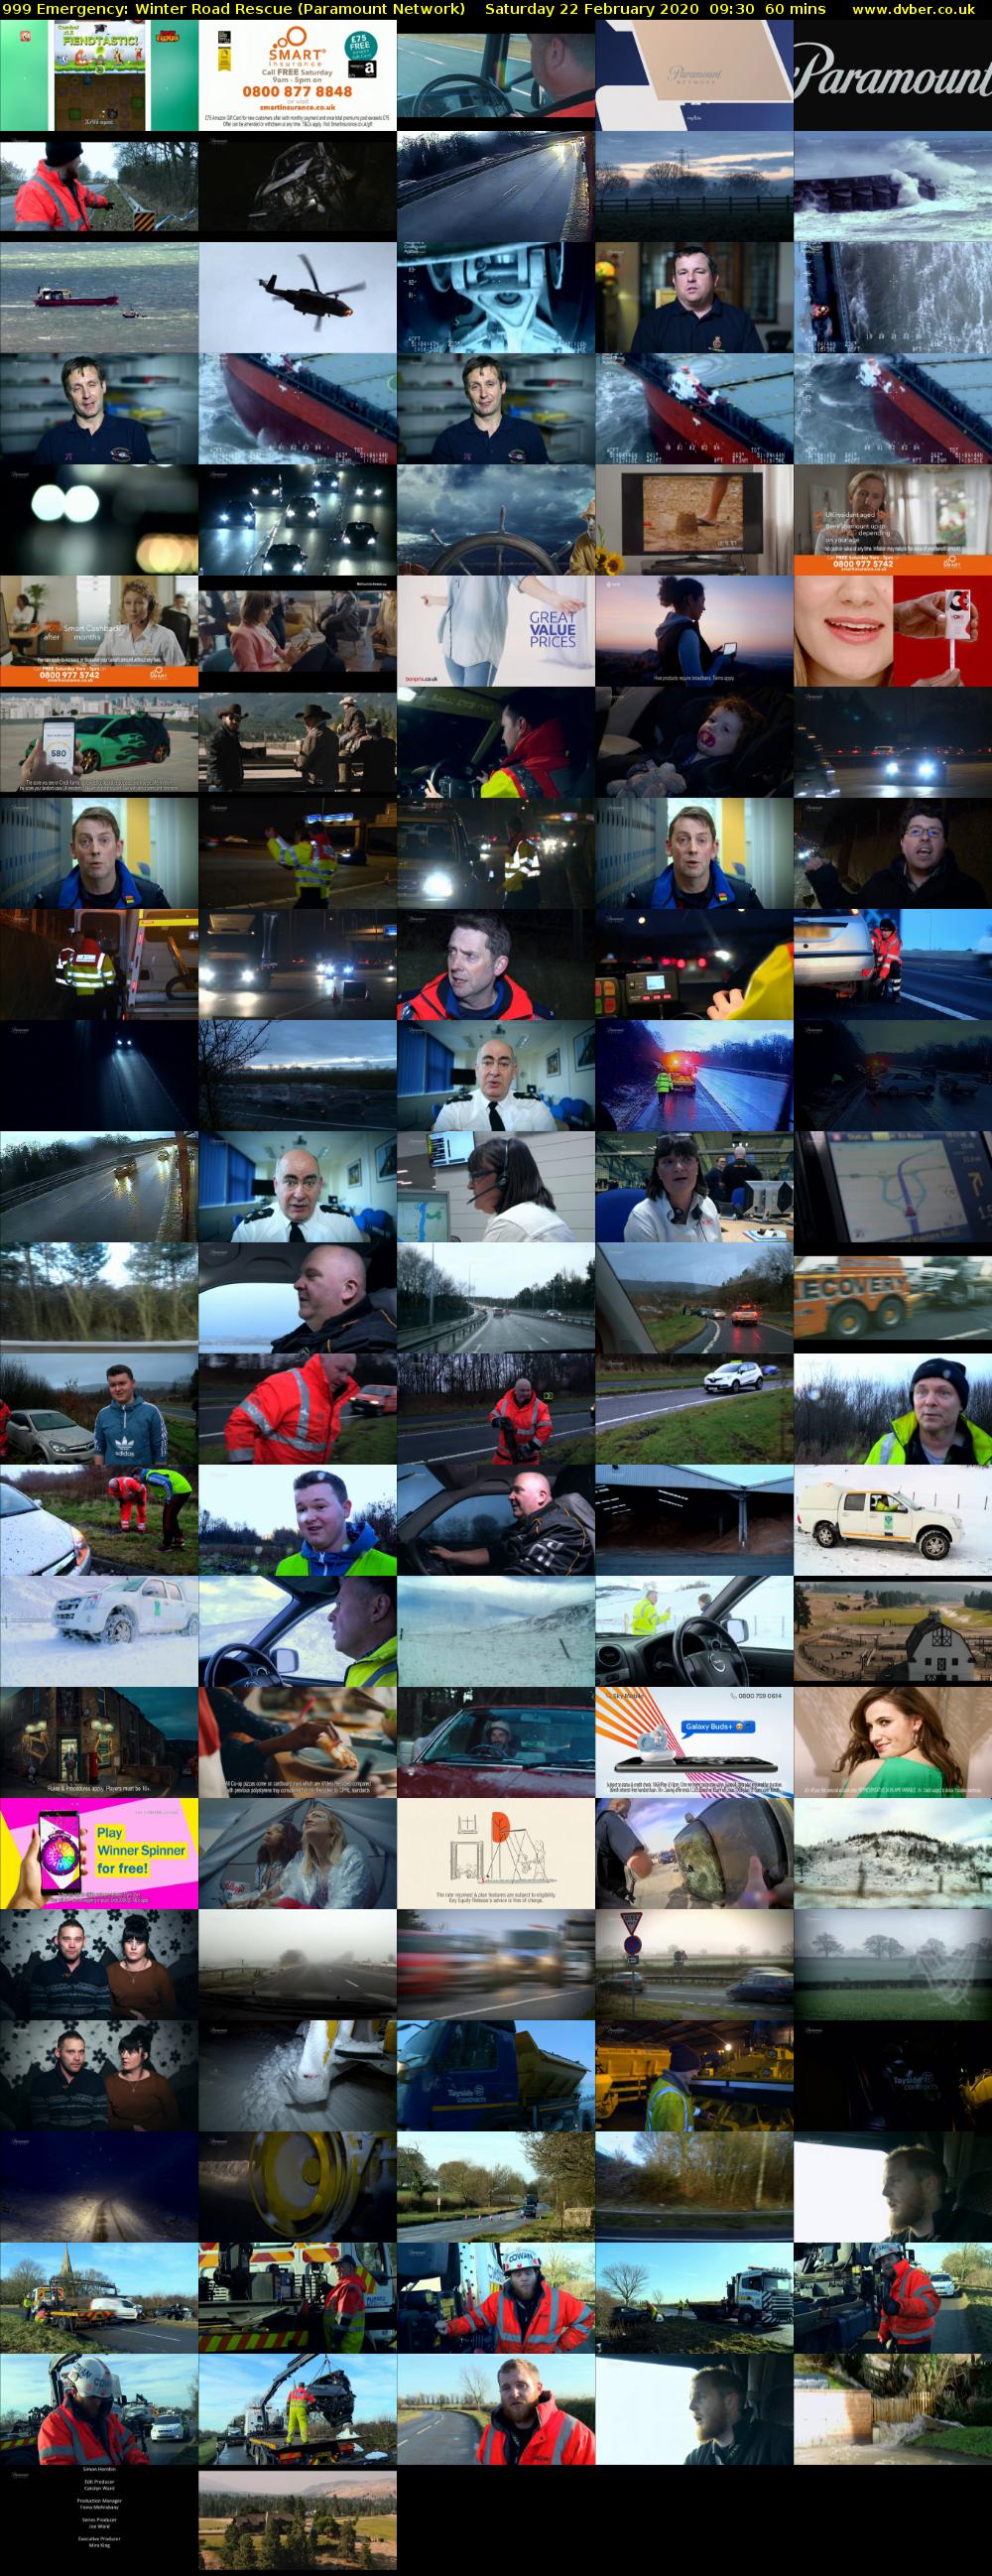 999 Emergency: Winter Road Rescue (Paramount Network) Saturday 22 February 2020 09:30 - 10:30